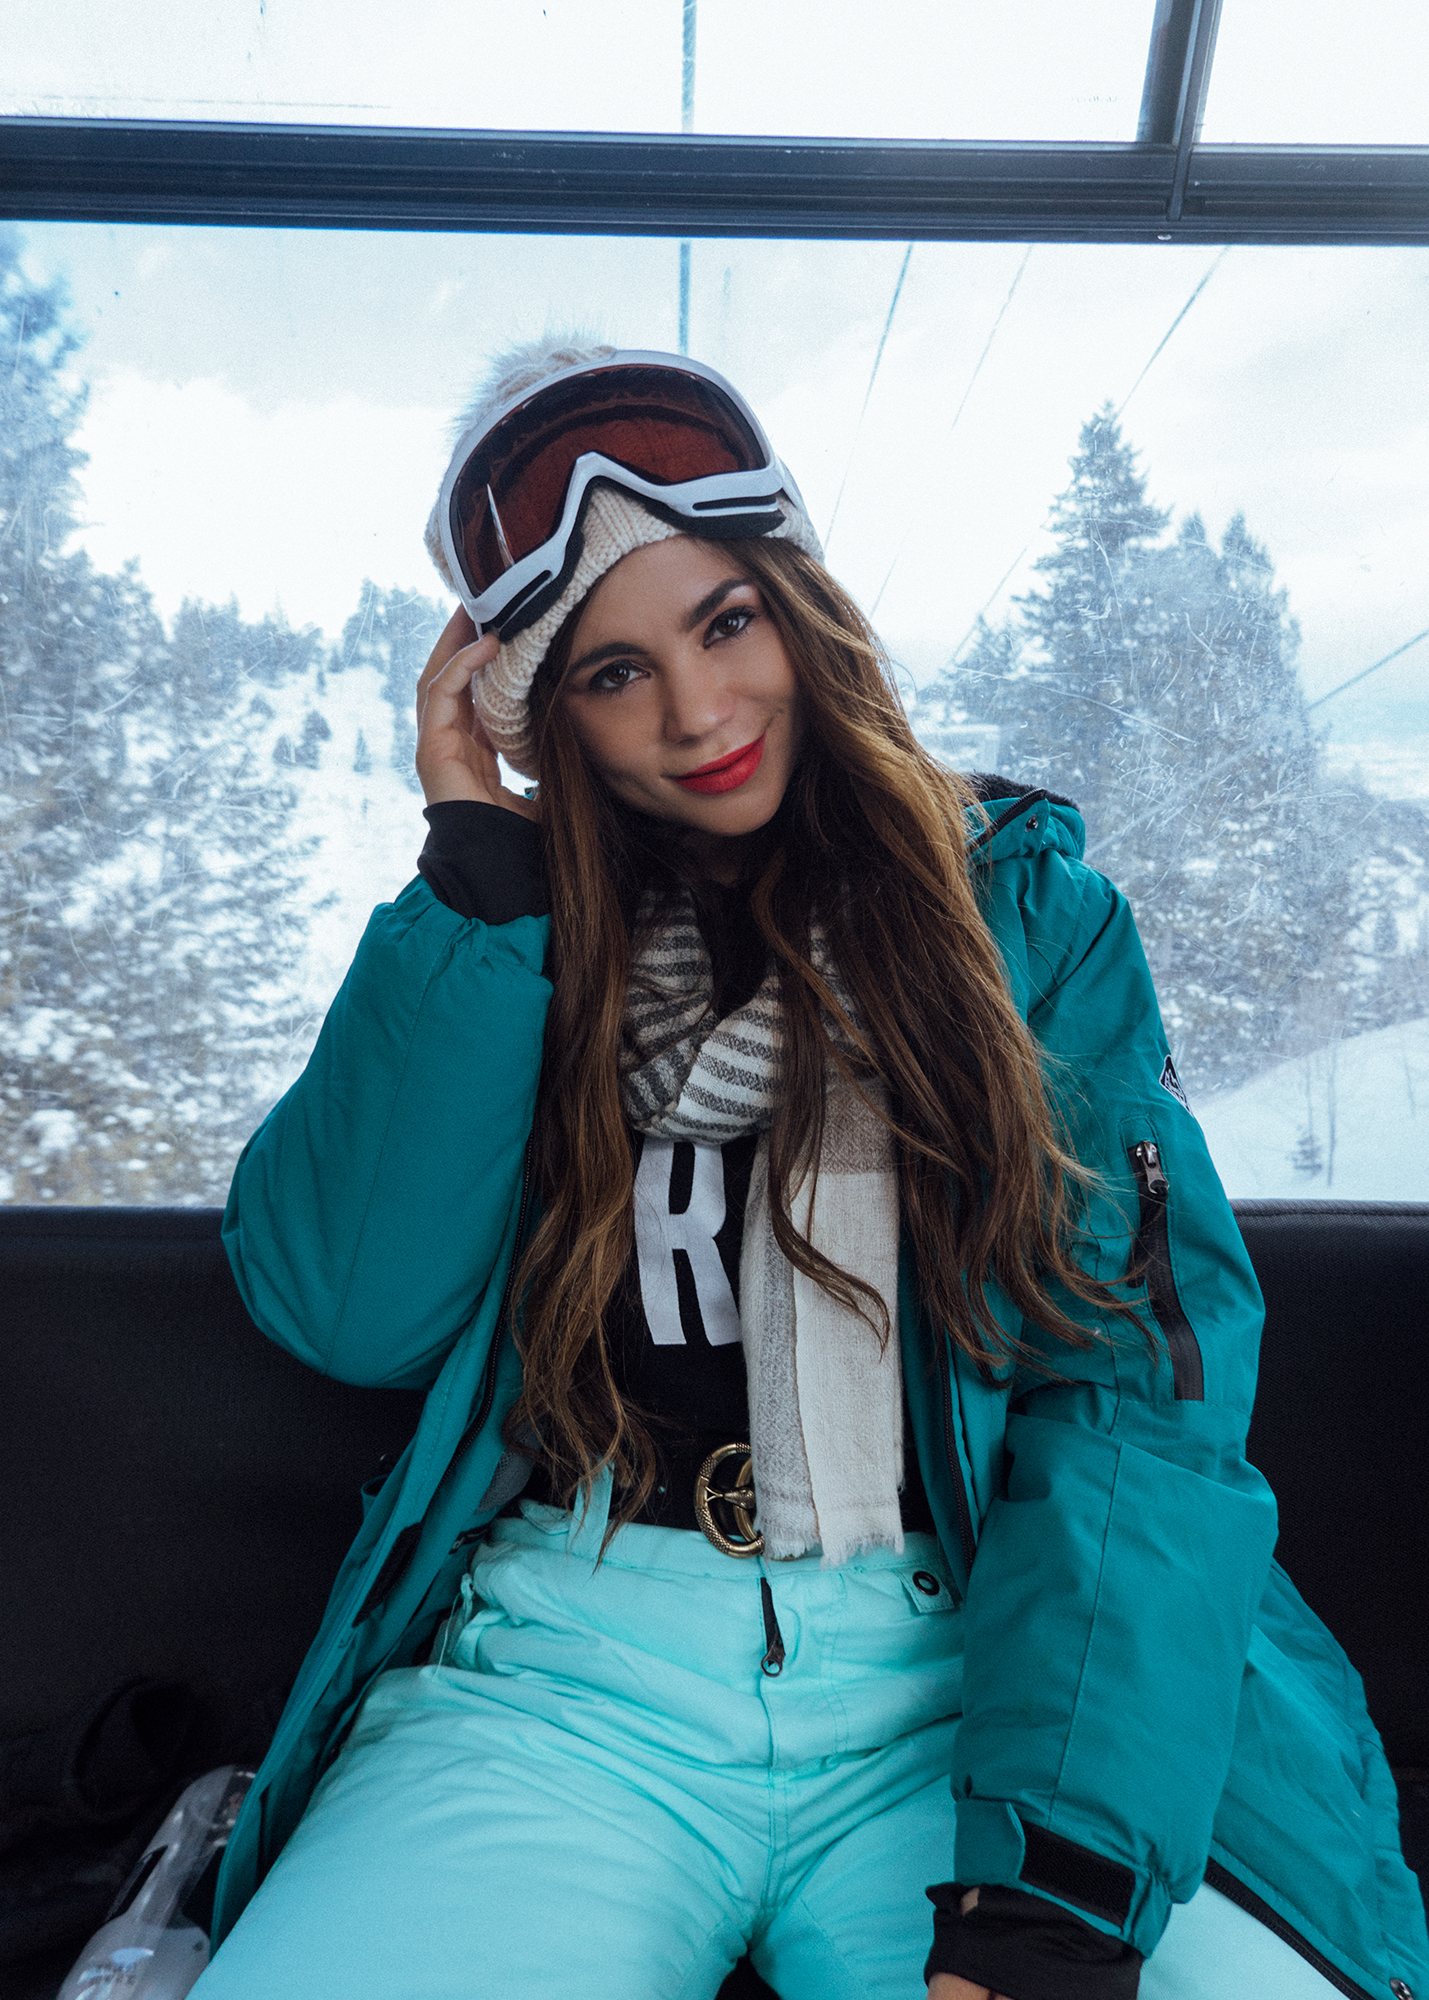 How to Get the Après-Ski Aesthetic on a Budget